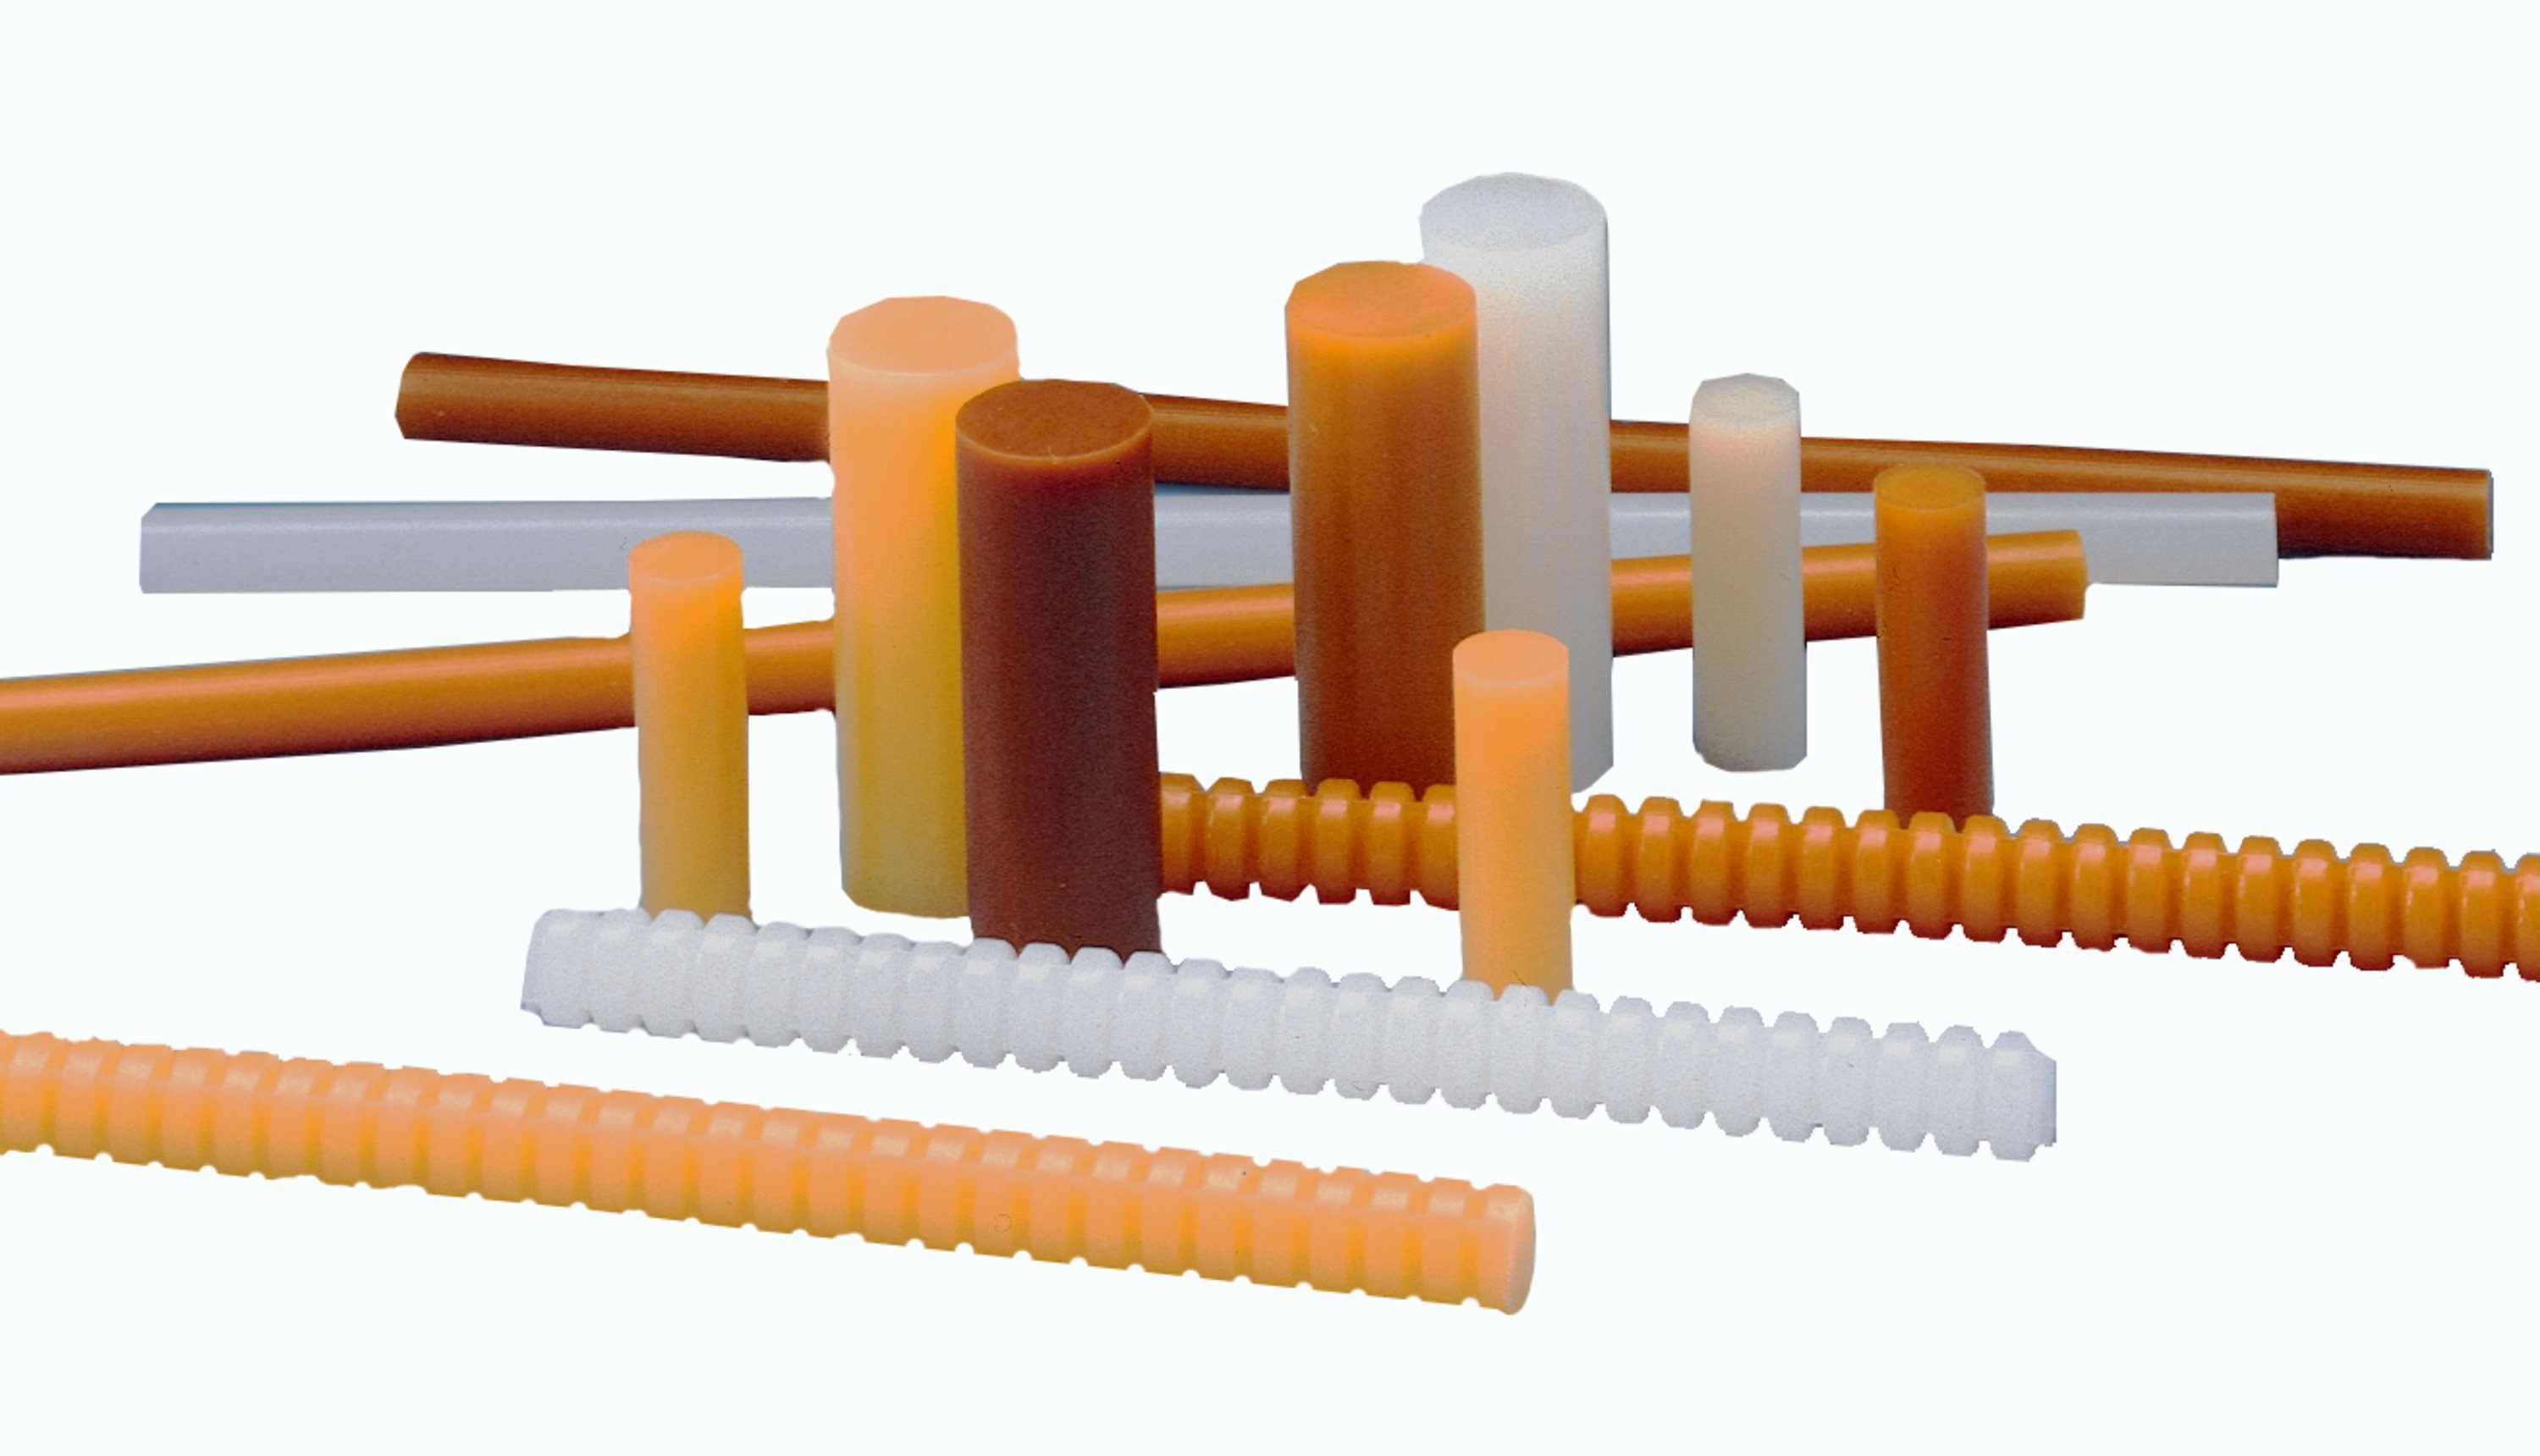 Melted adhesive is extruded through a nozzle using a 3M Hot Melt Applicator by either pneumatic pressure, a mechanical trigger mechanism, or with pressure applied directly on the stick. 